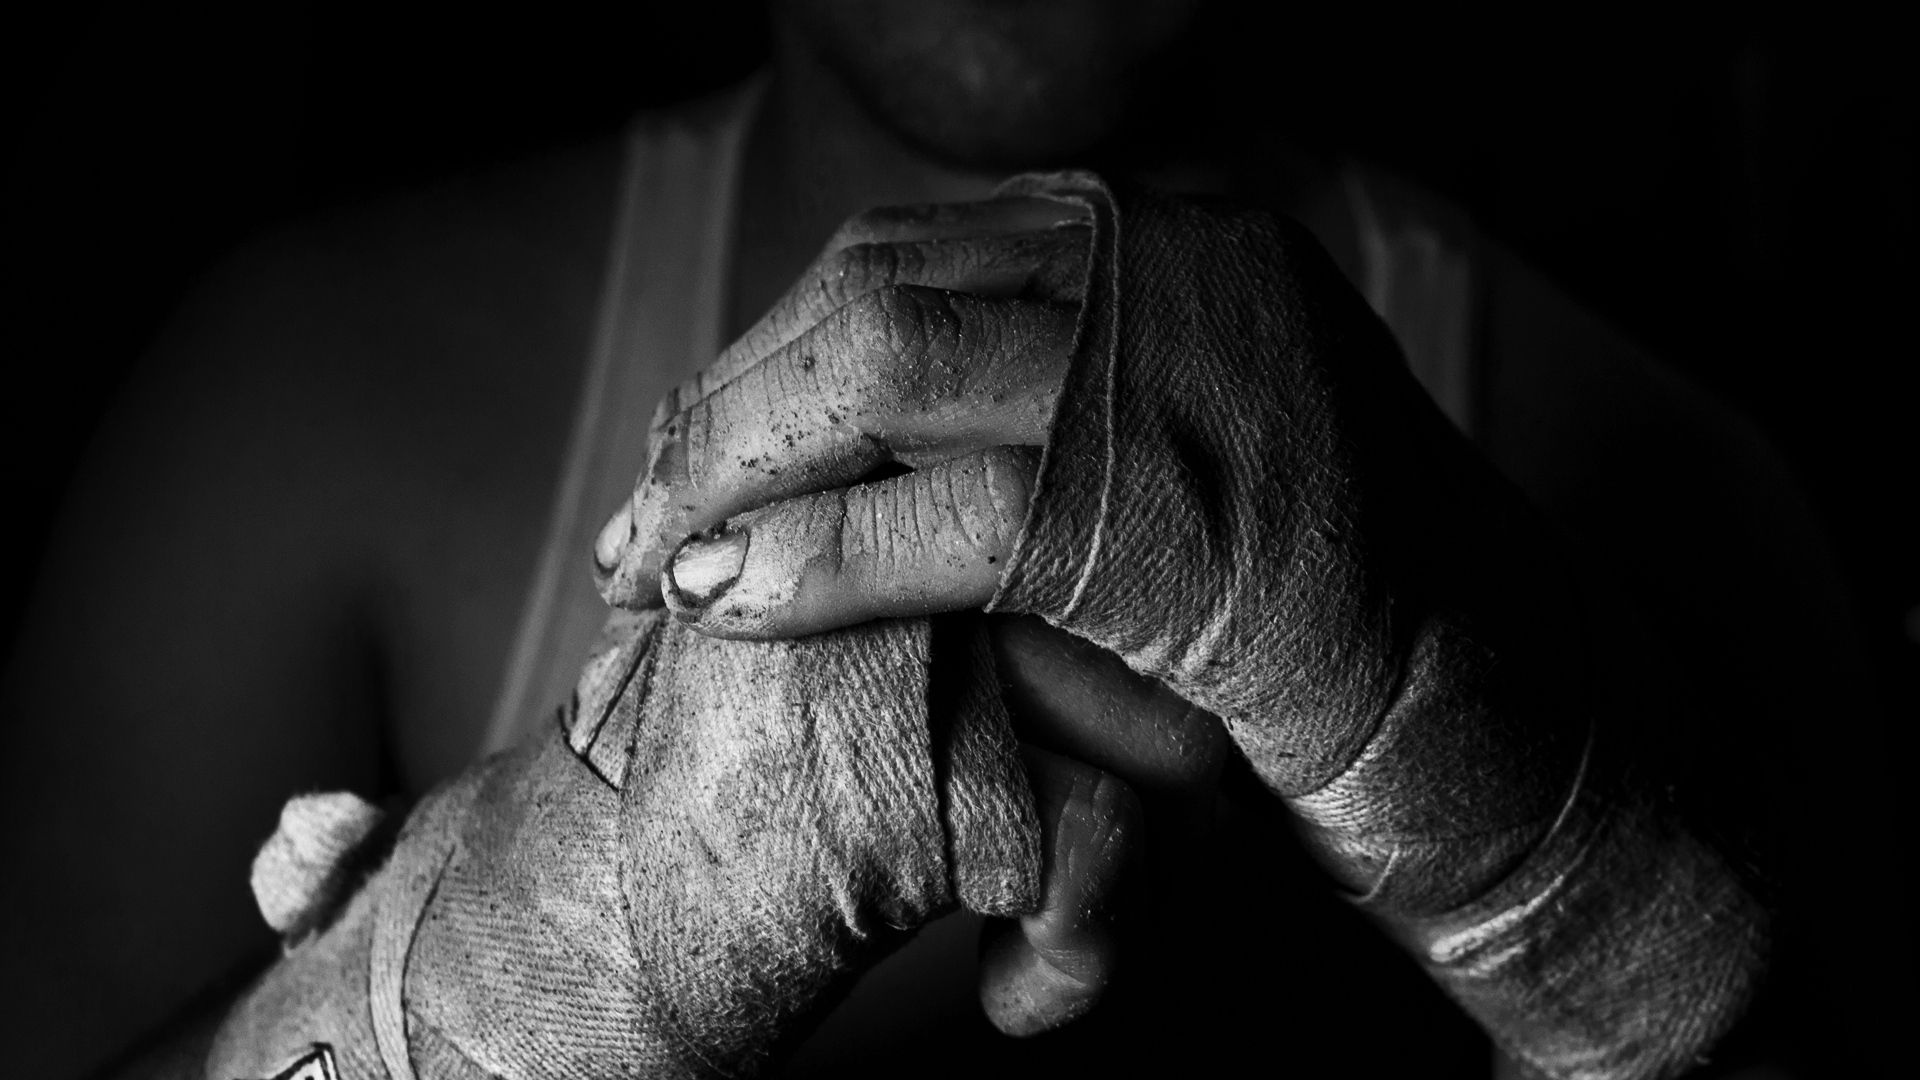 Horizontal Wallpaper sports, hands, bw, chb, fighter, bandages